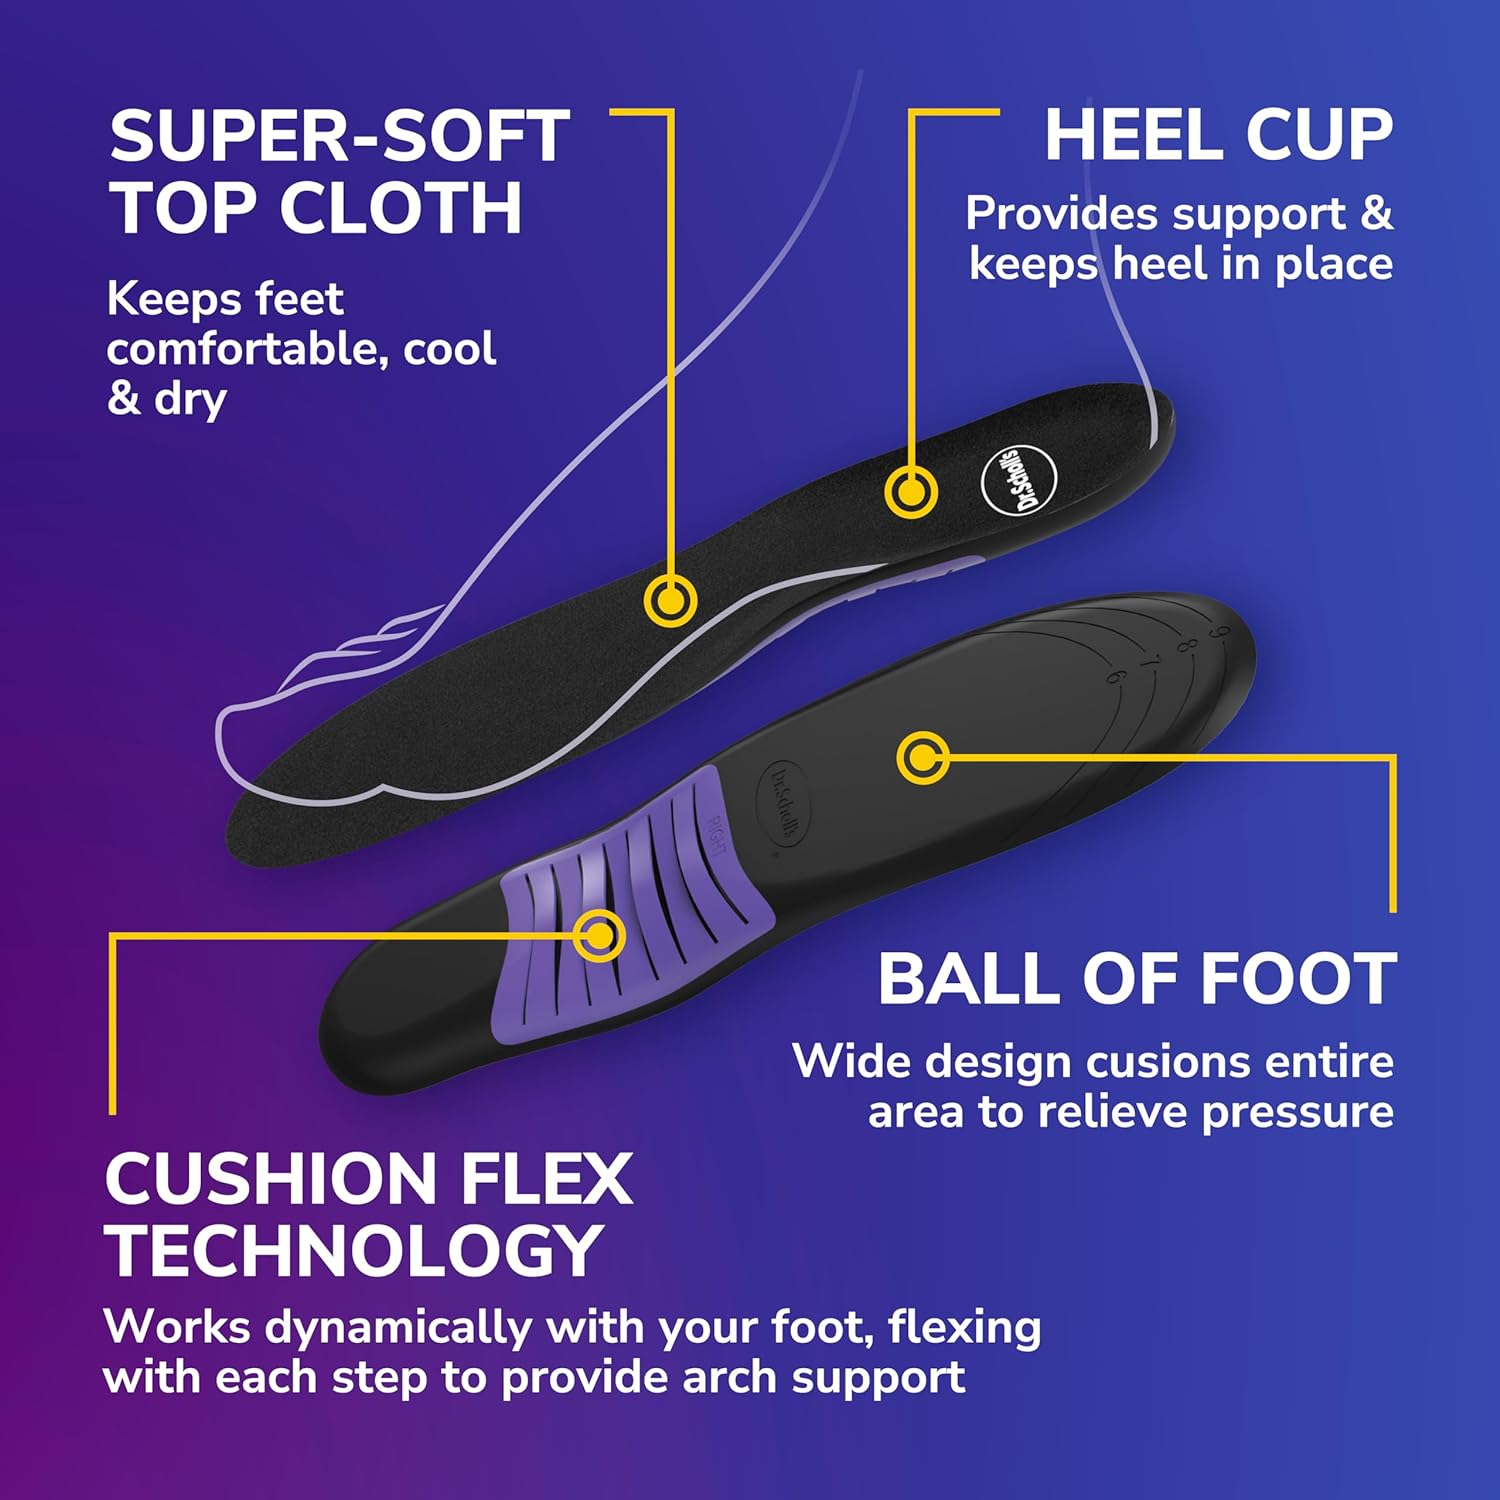 Dr. Scholls® Love Your Sneakers Full Length Insoles, All-Day Comfort for Slip on High Top Sneaker, Prevent Discomfort, Arch Support, Absorb Shock, Trim Insert to Fit Shoe, Women Size 6-10, 1 Pair